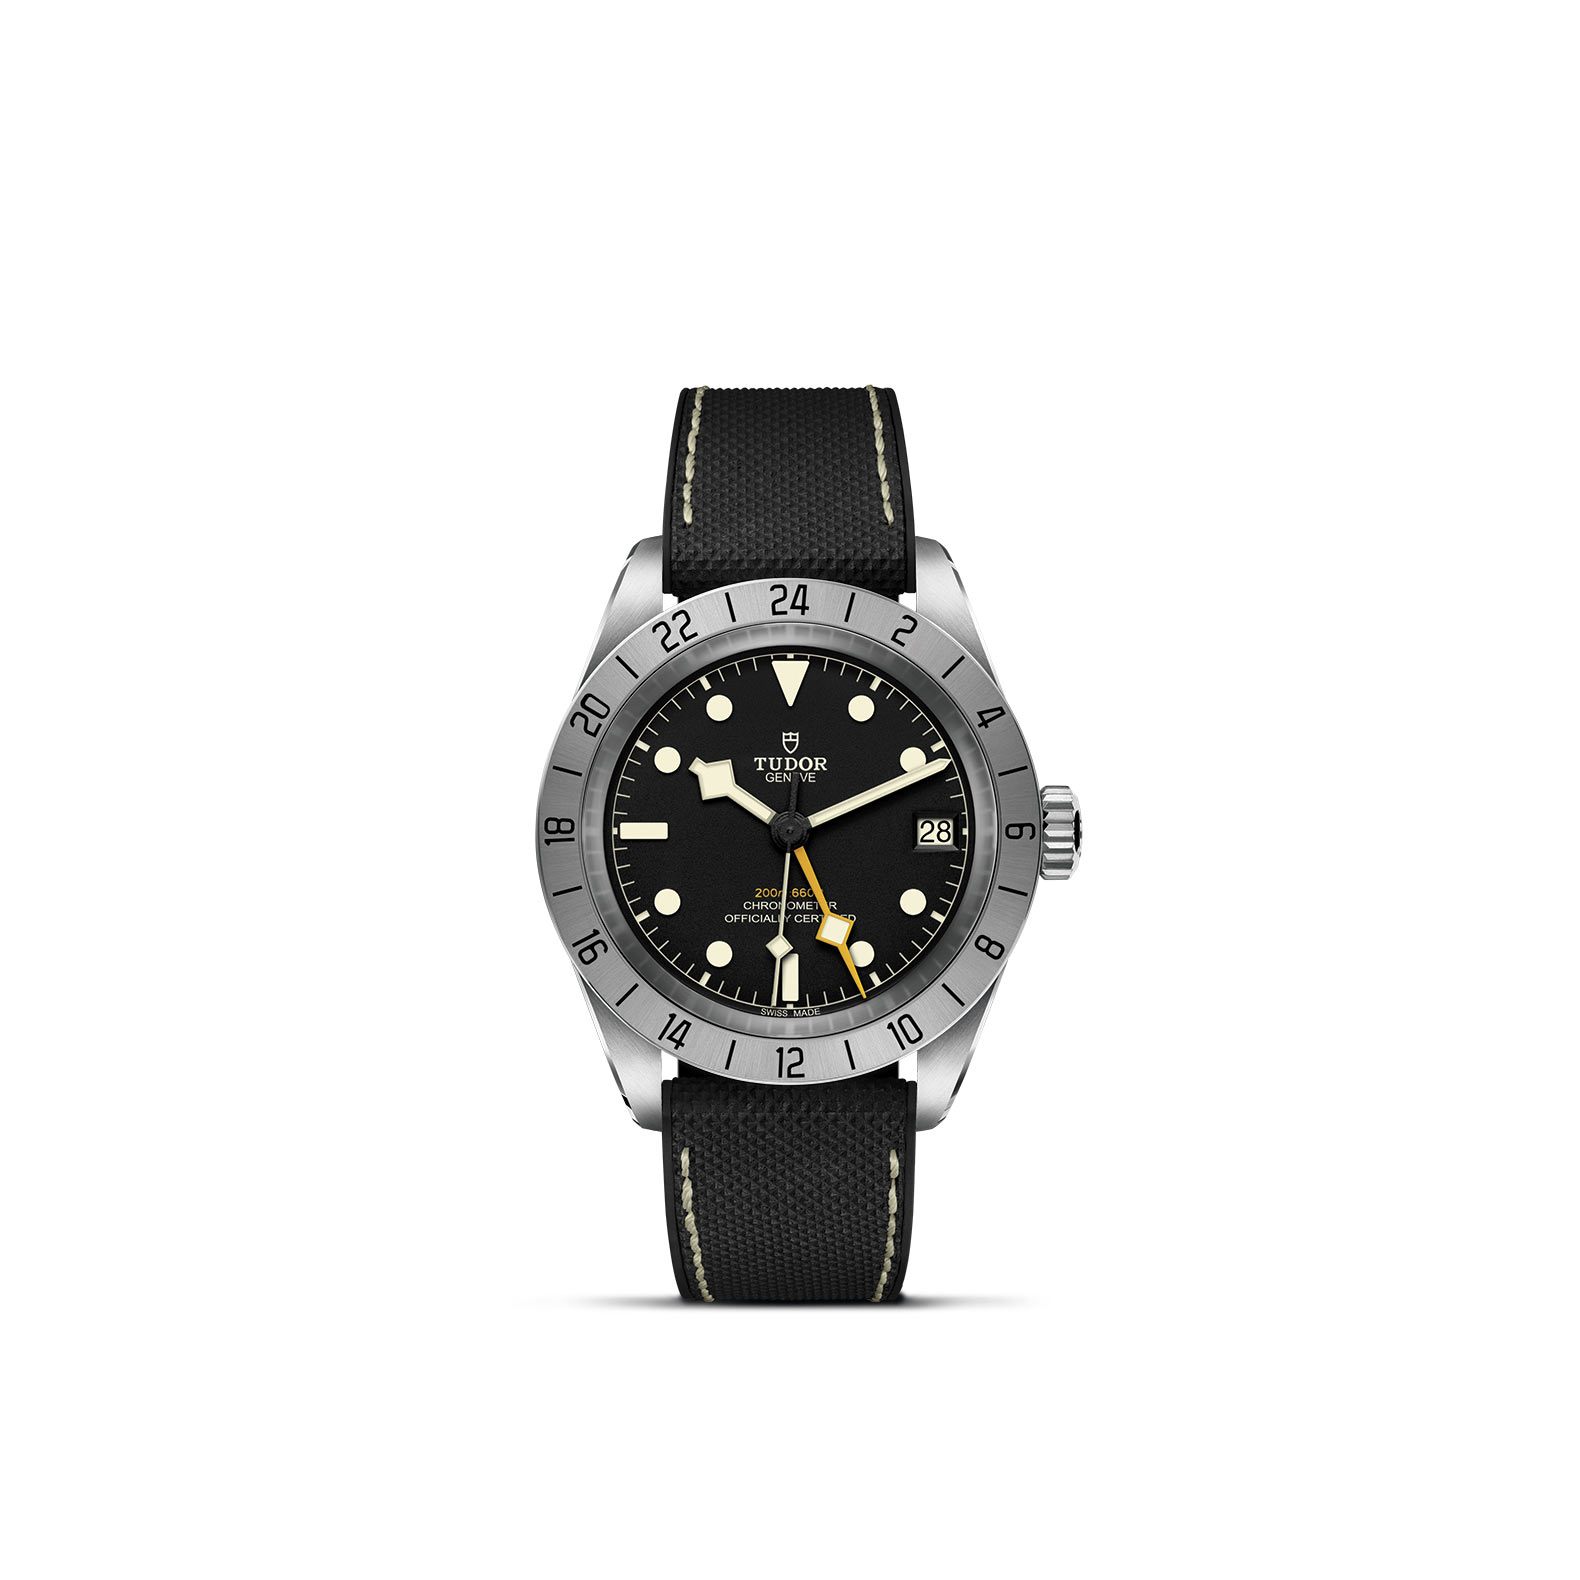 TUDOR BLACK BAY PRO standing upright, highlighting its classic design against a white background.